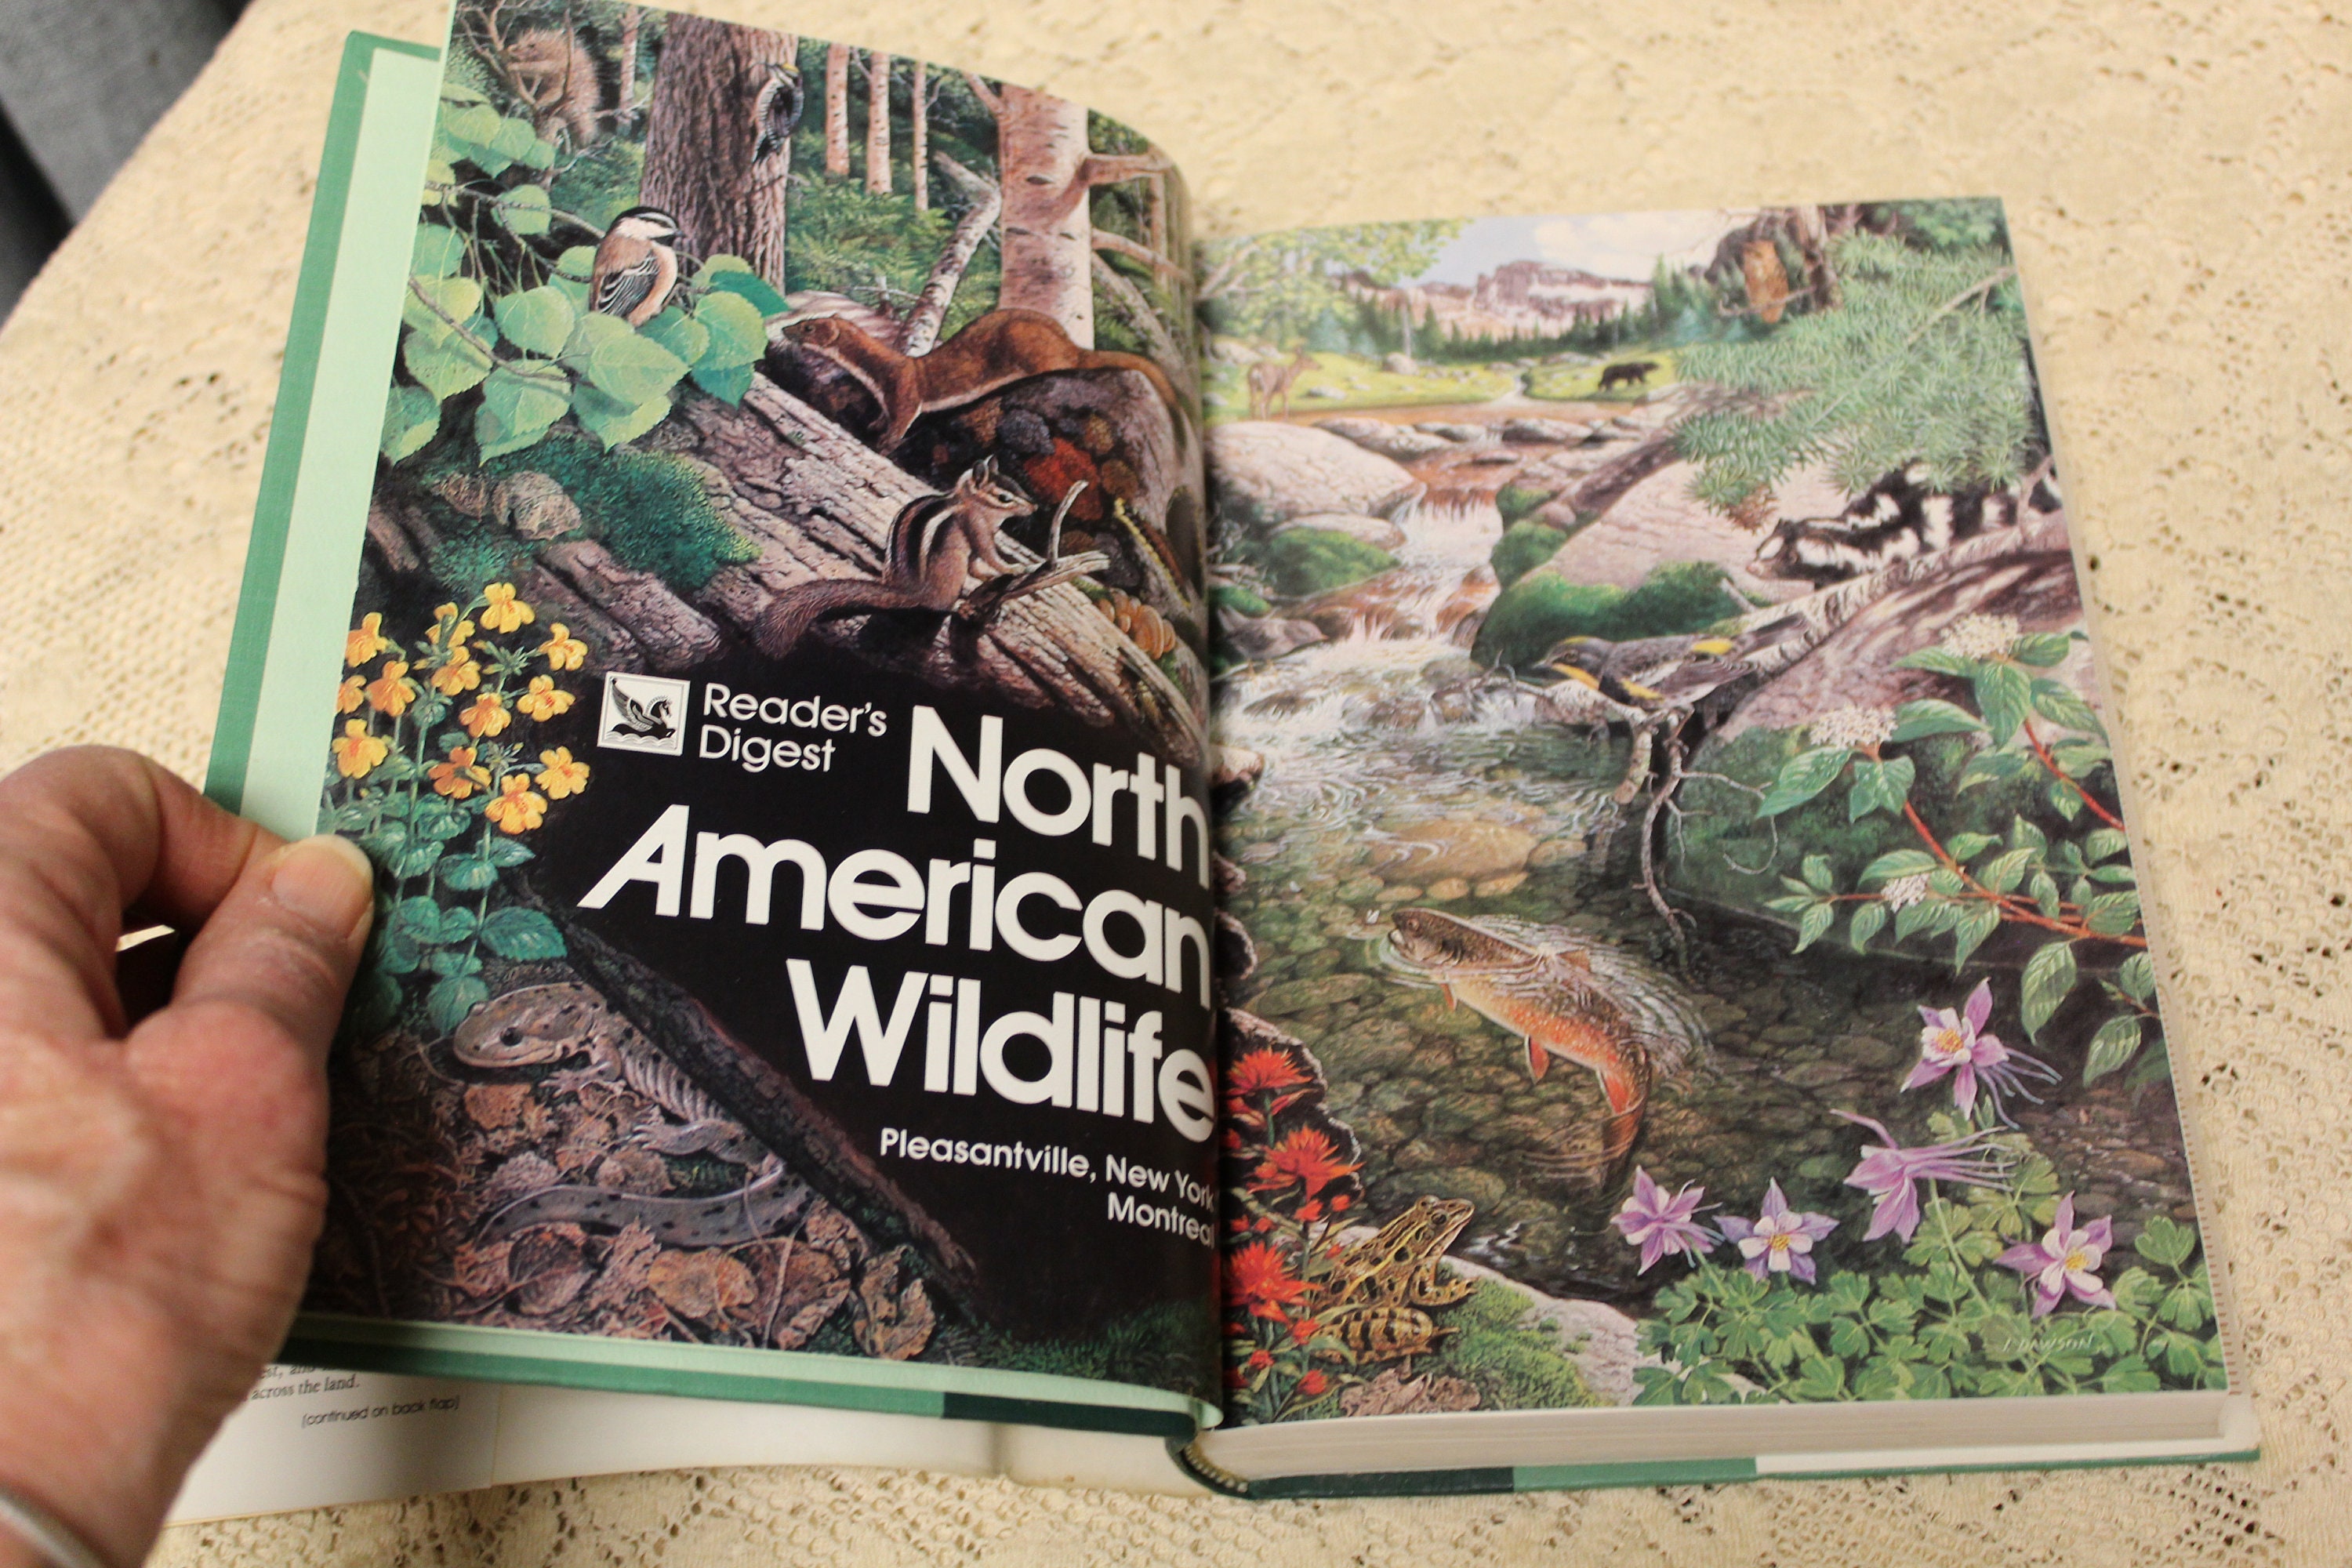 Reader's Digest North American Wildlife / Illustrated Guide to 2,000 Plants  and Animals / 1986 Hardcover Book / Nature, Outdoors, Botany 